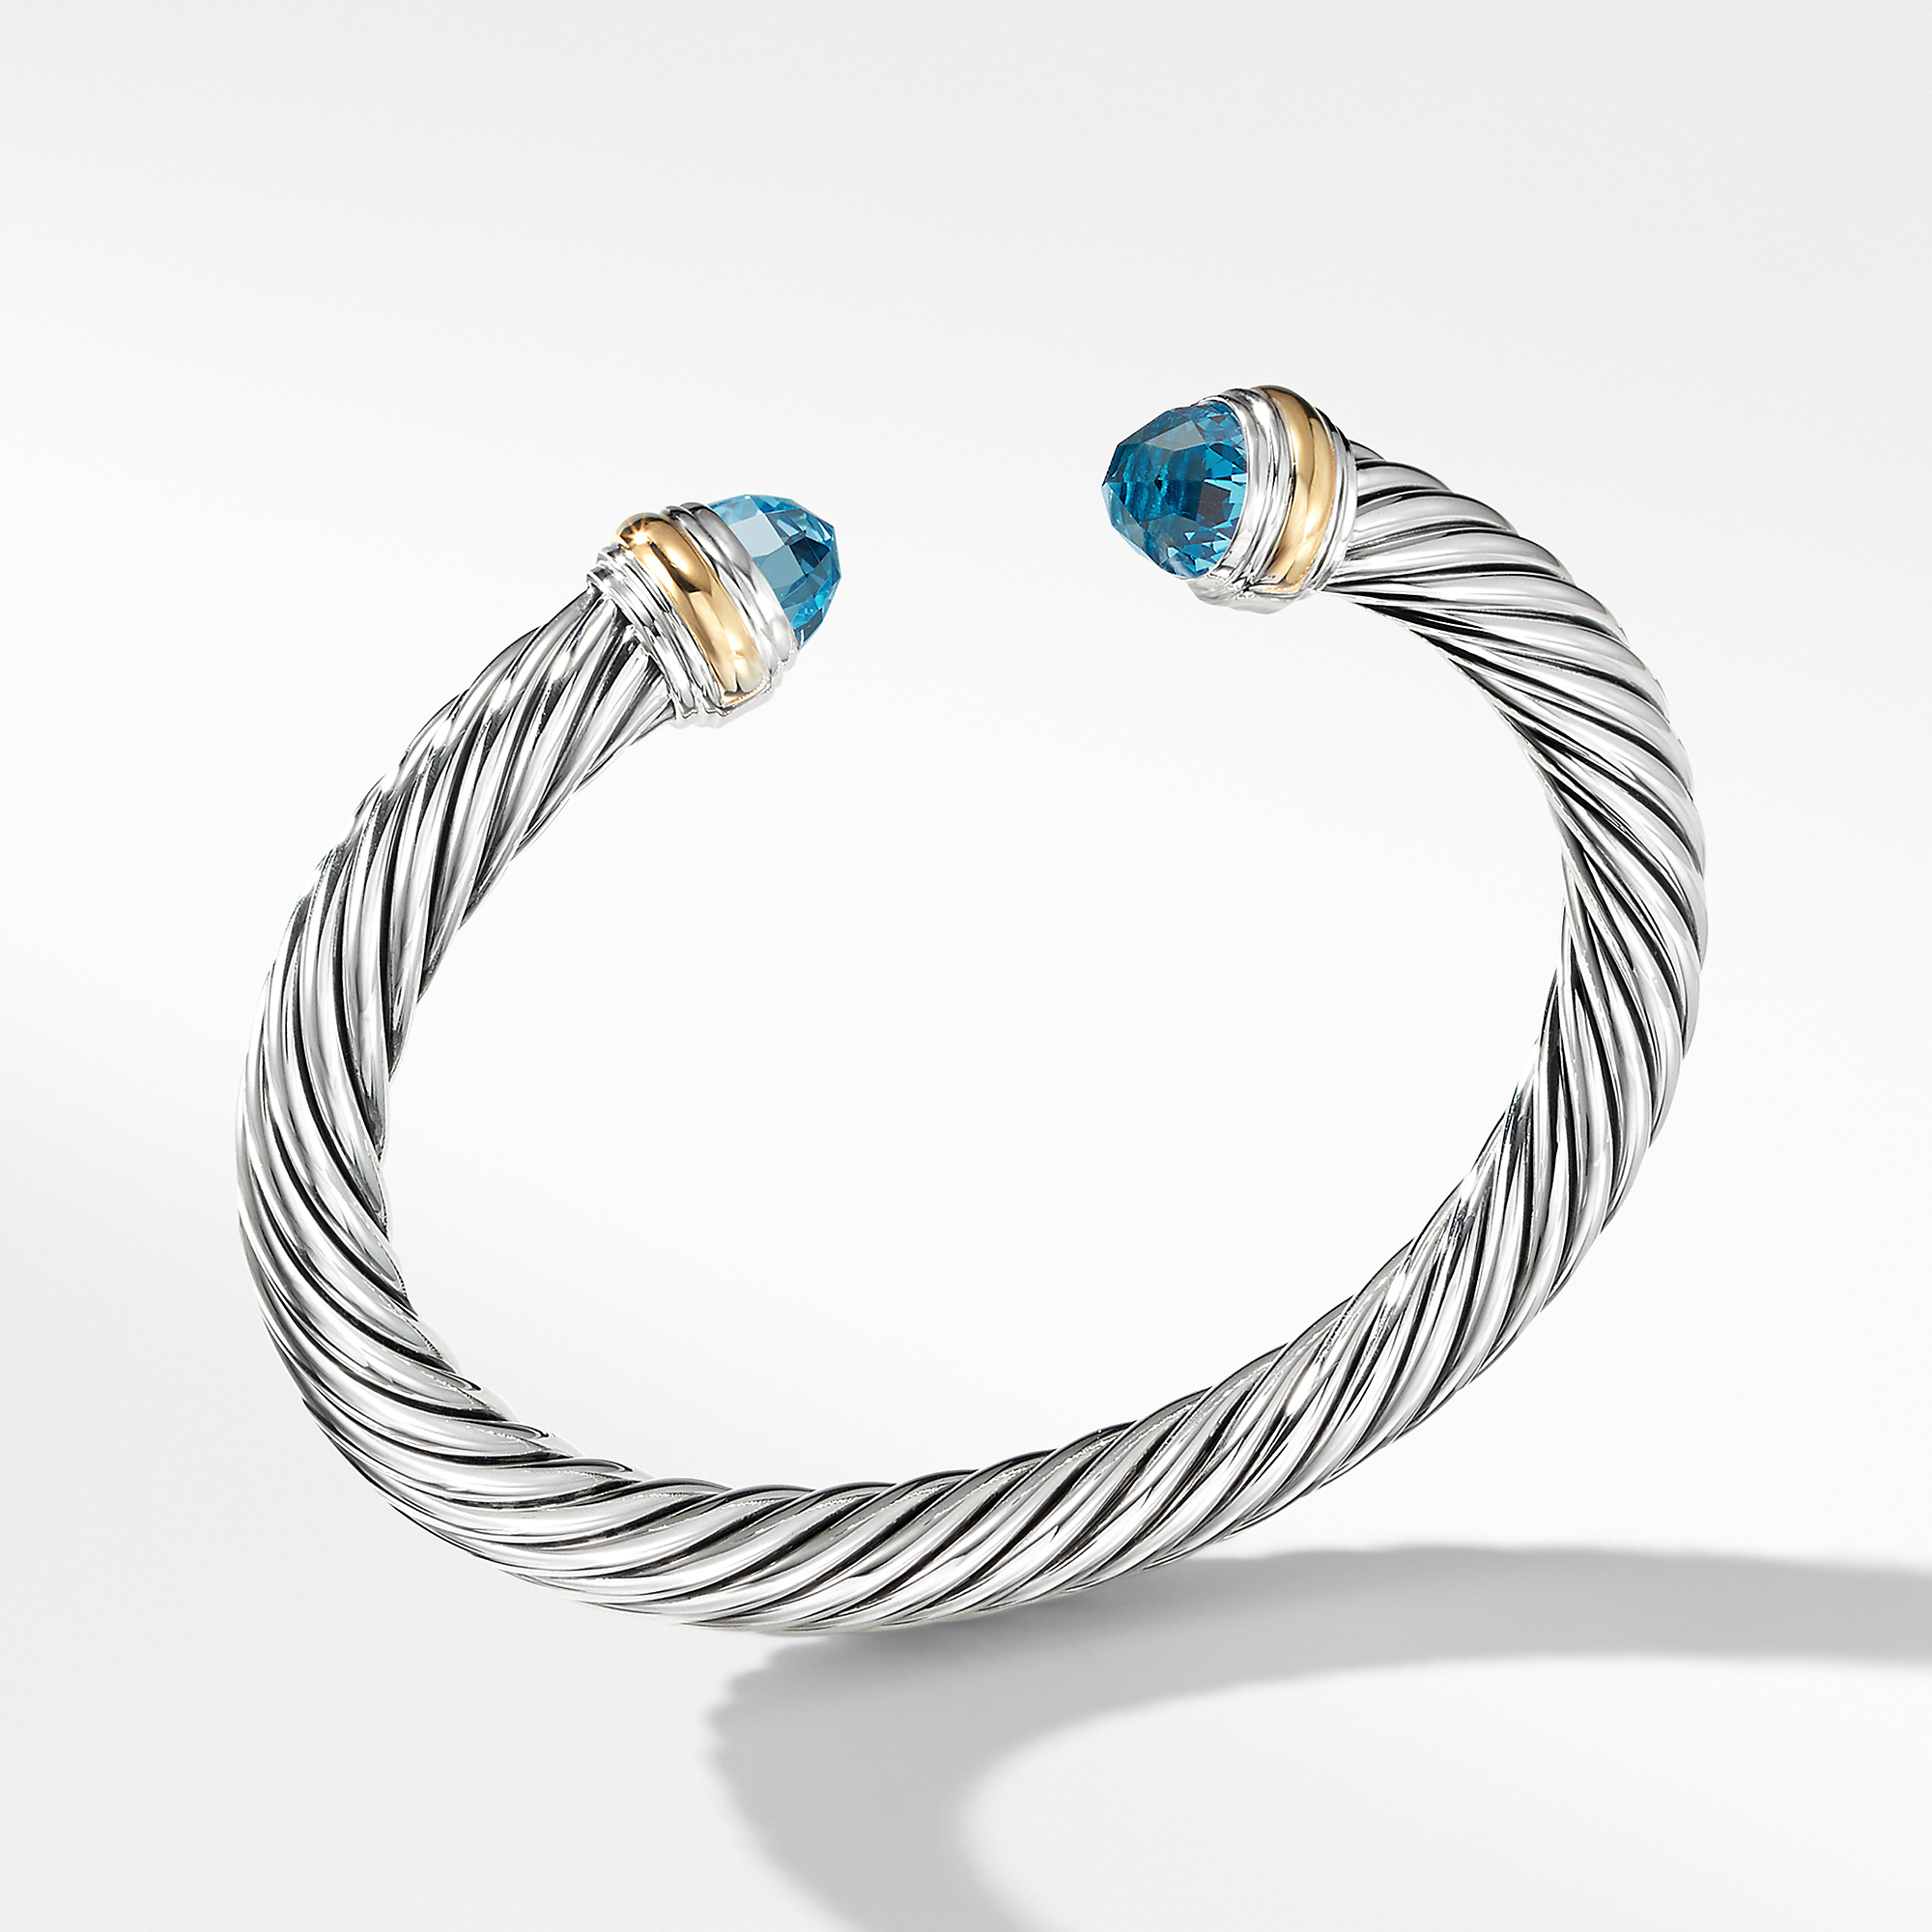 Cable Classics Bracelet in Sterling Silver with Blue Topaz and 14K Yellow Gold